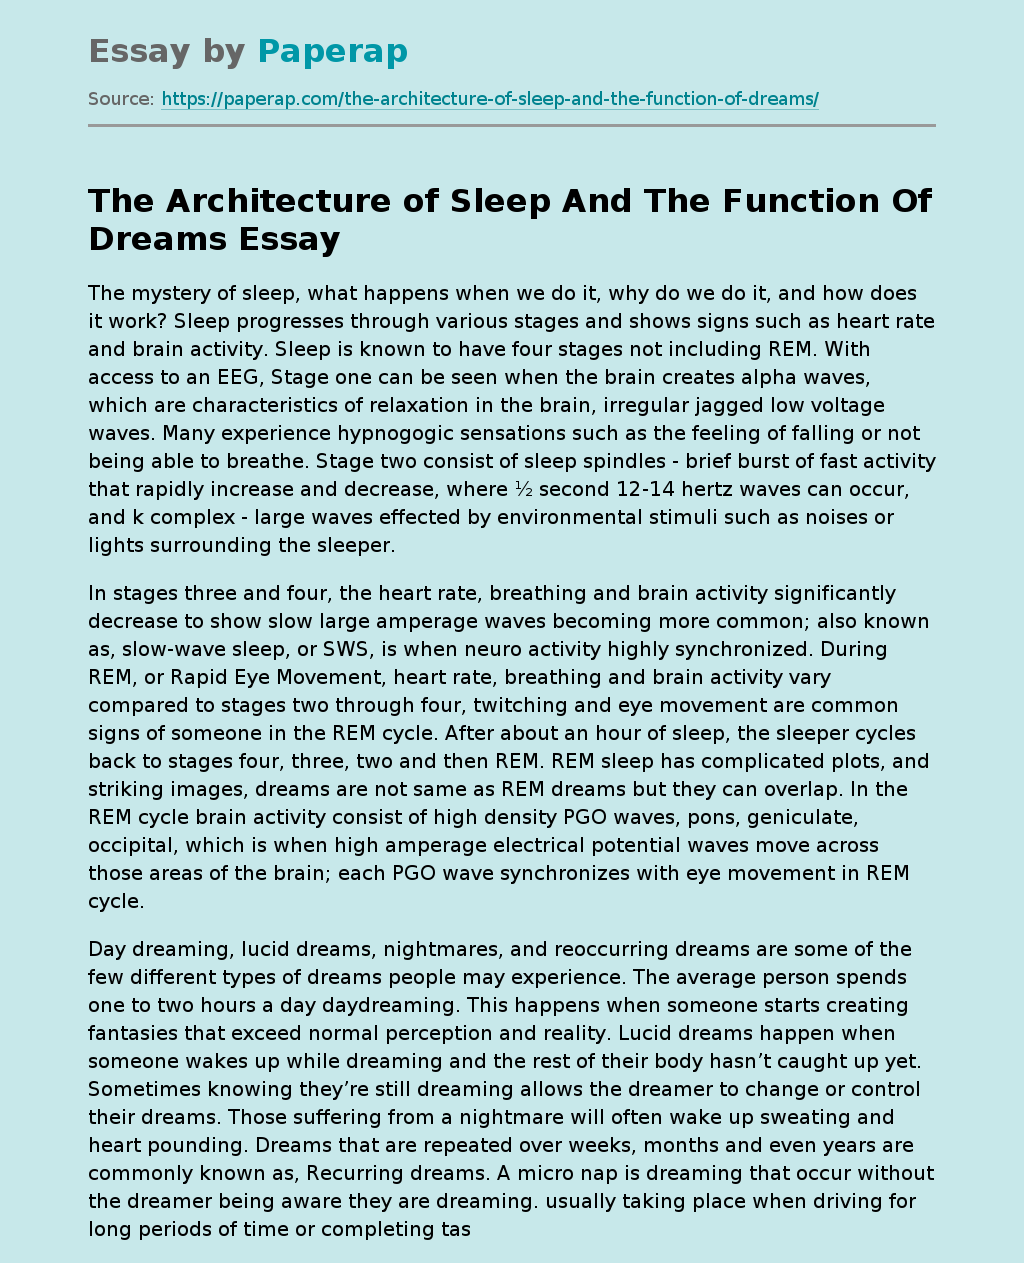 The Architecture of Sleep And The Function Of Dreams